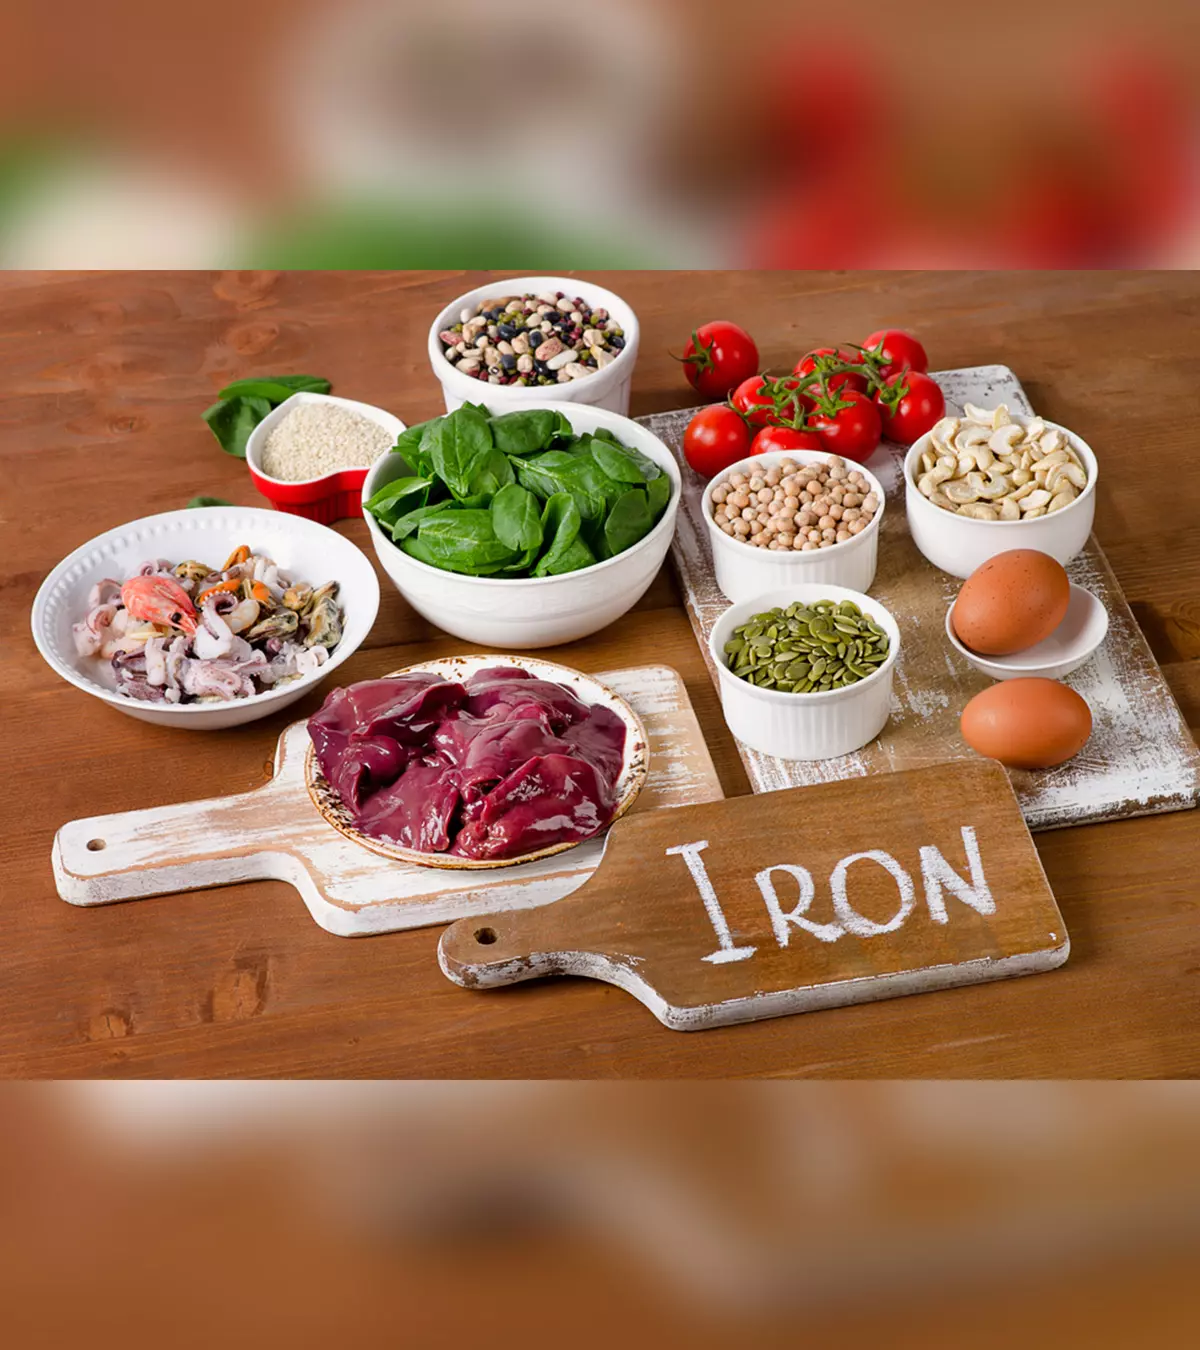 Best Iron-rich Foods For Toddlers And Recipes To Try